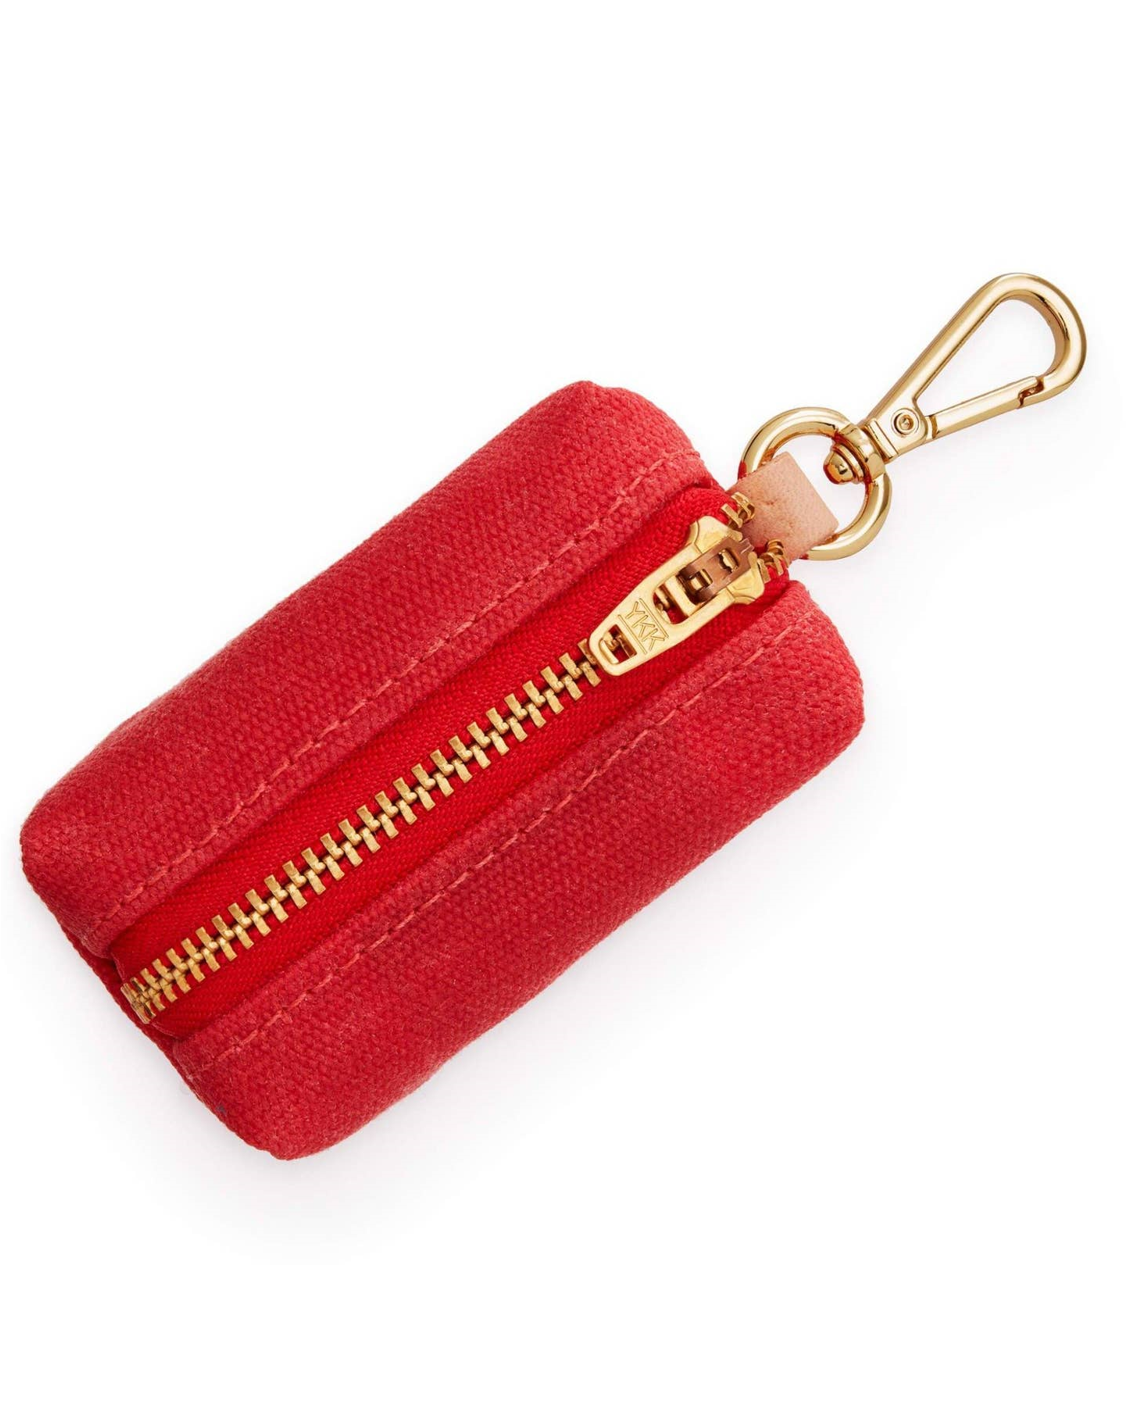 Waxed red cotton canvas is complete with elevated brass hardware. Sleek clasp easily attaches to your leash's O ring. There's no mess left behind with this adorable accessory.